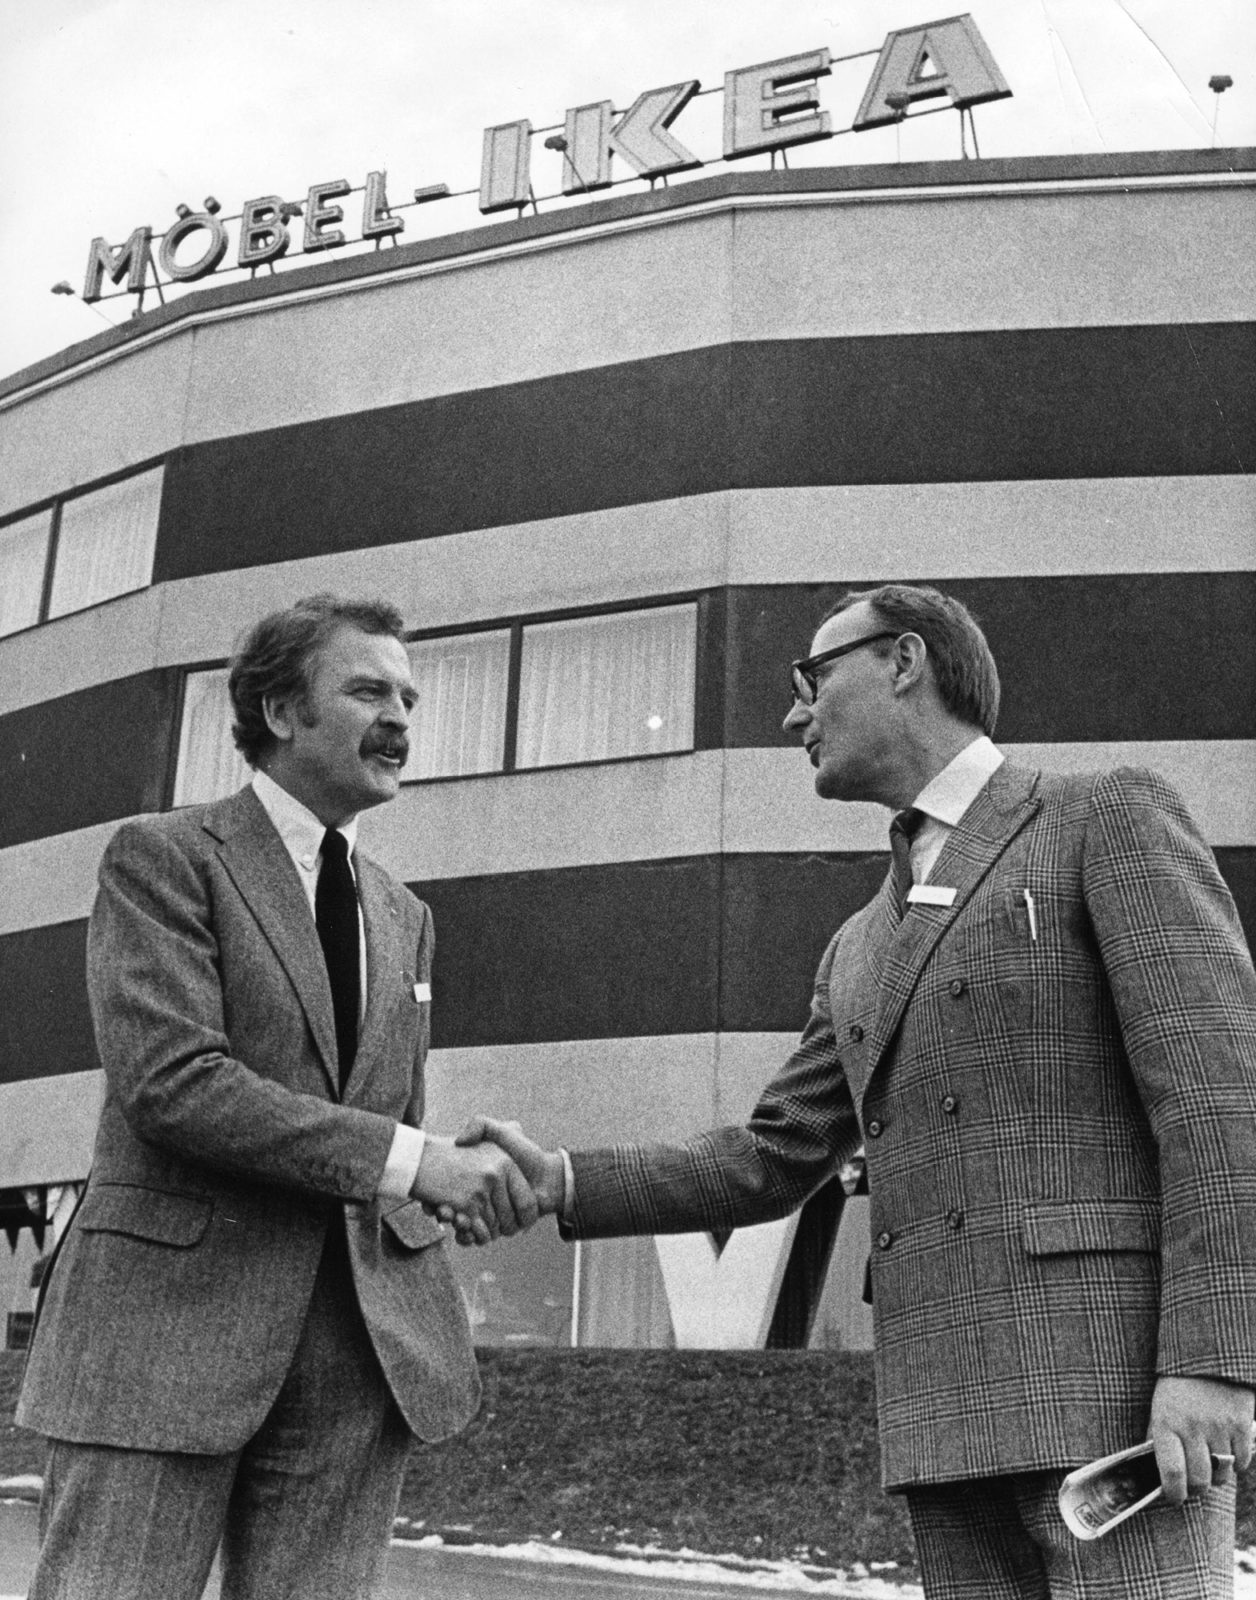 Hans Ax and Ingvar Kamprad in suits, shake hands in front of big building with sign FURNITURE IKEA in Swedish.